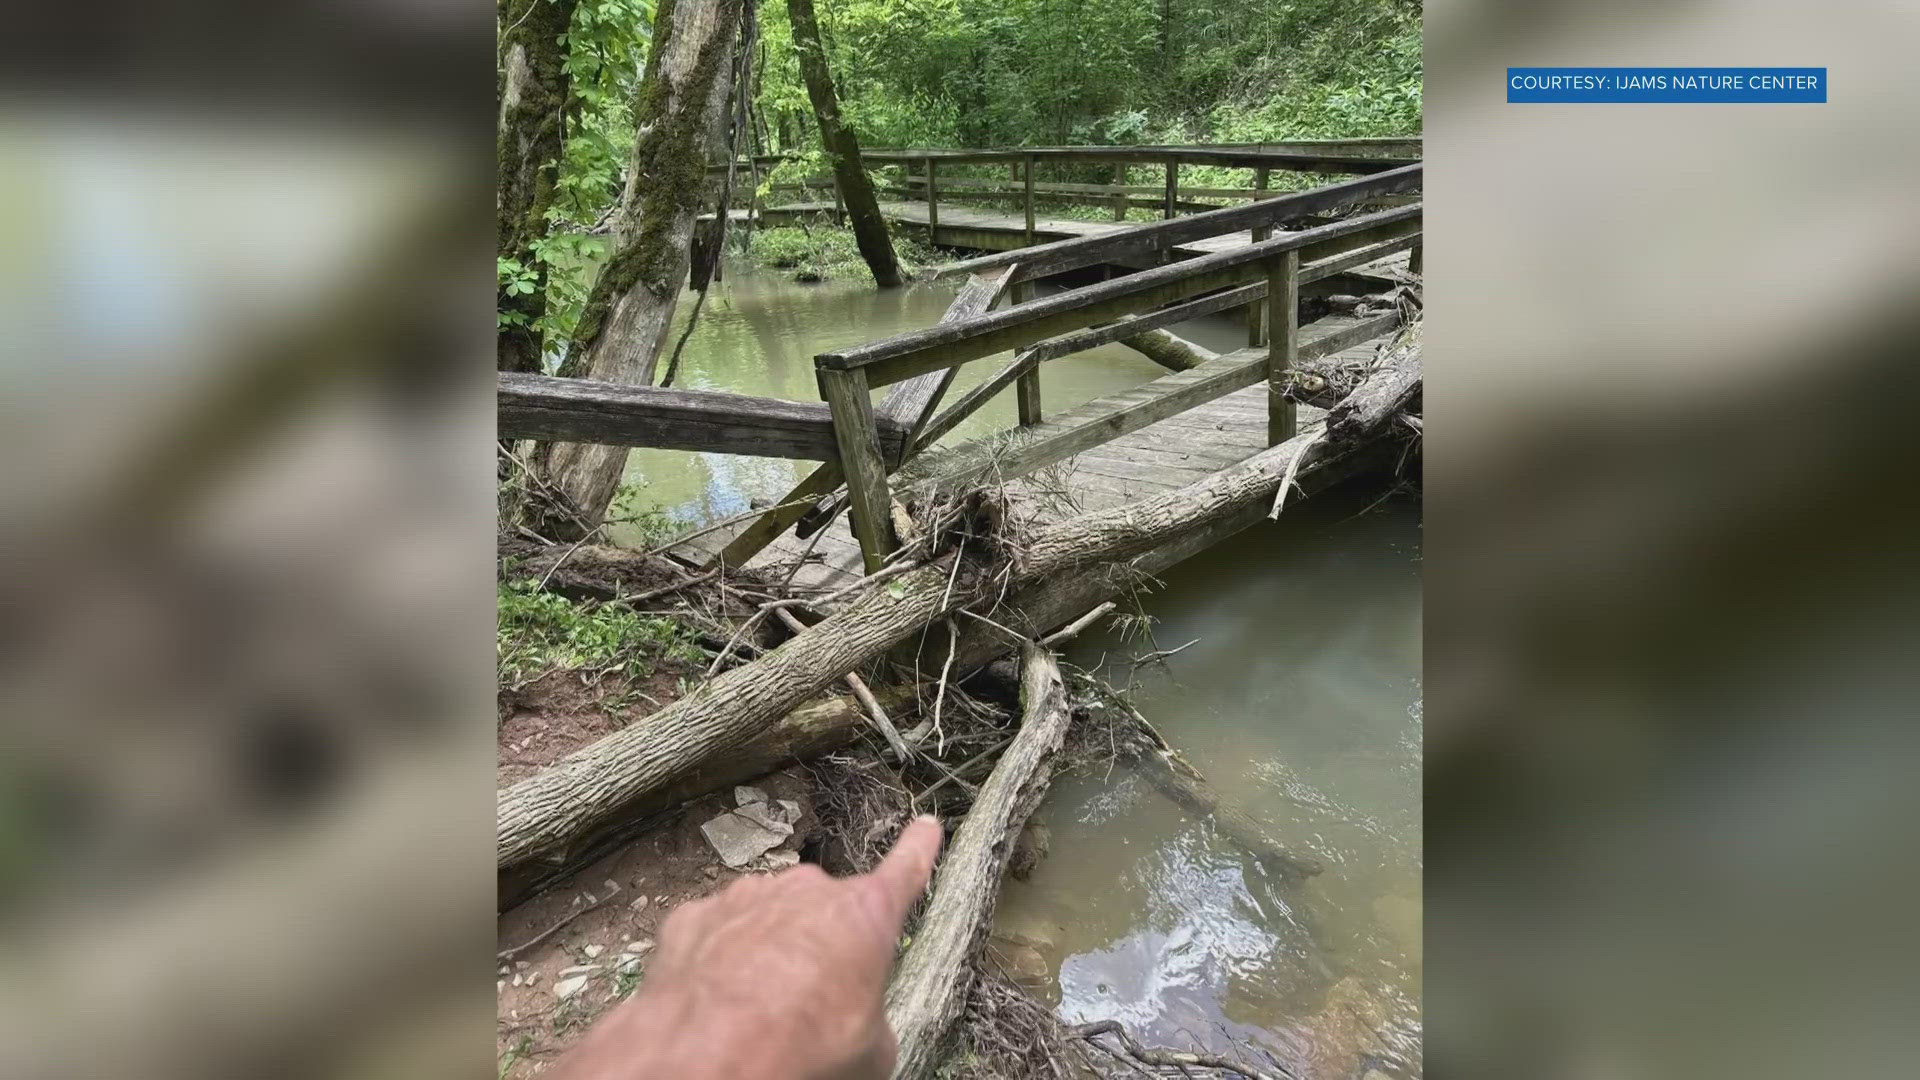 Managers say the Toll Creek boardwalk was damaged by a tree. They say high water carried the tree downstream.